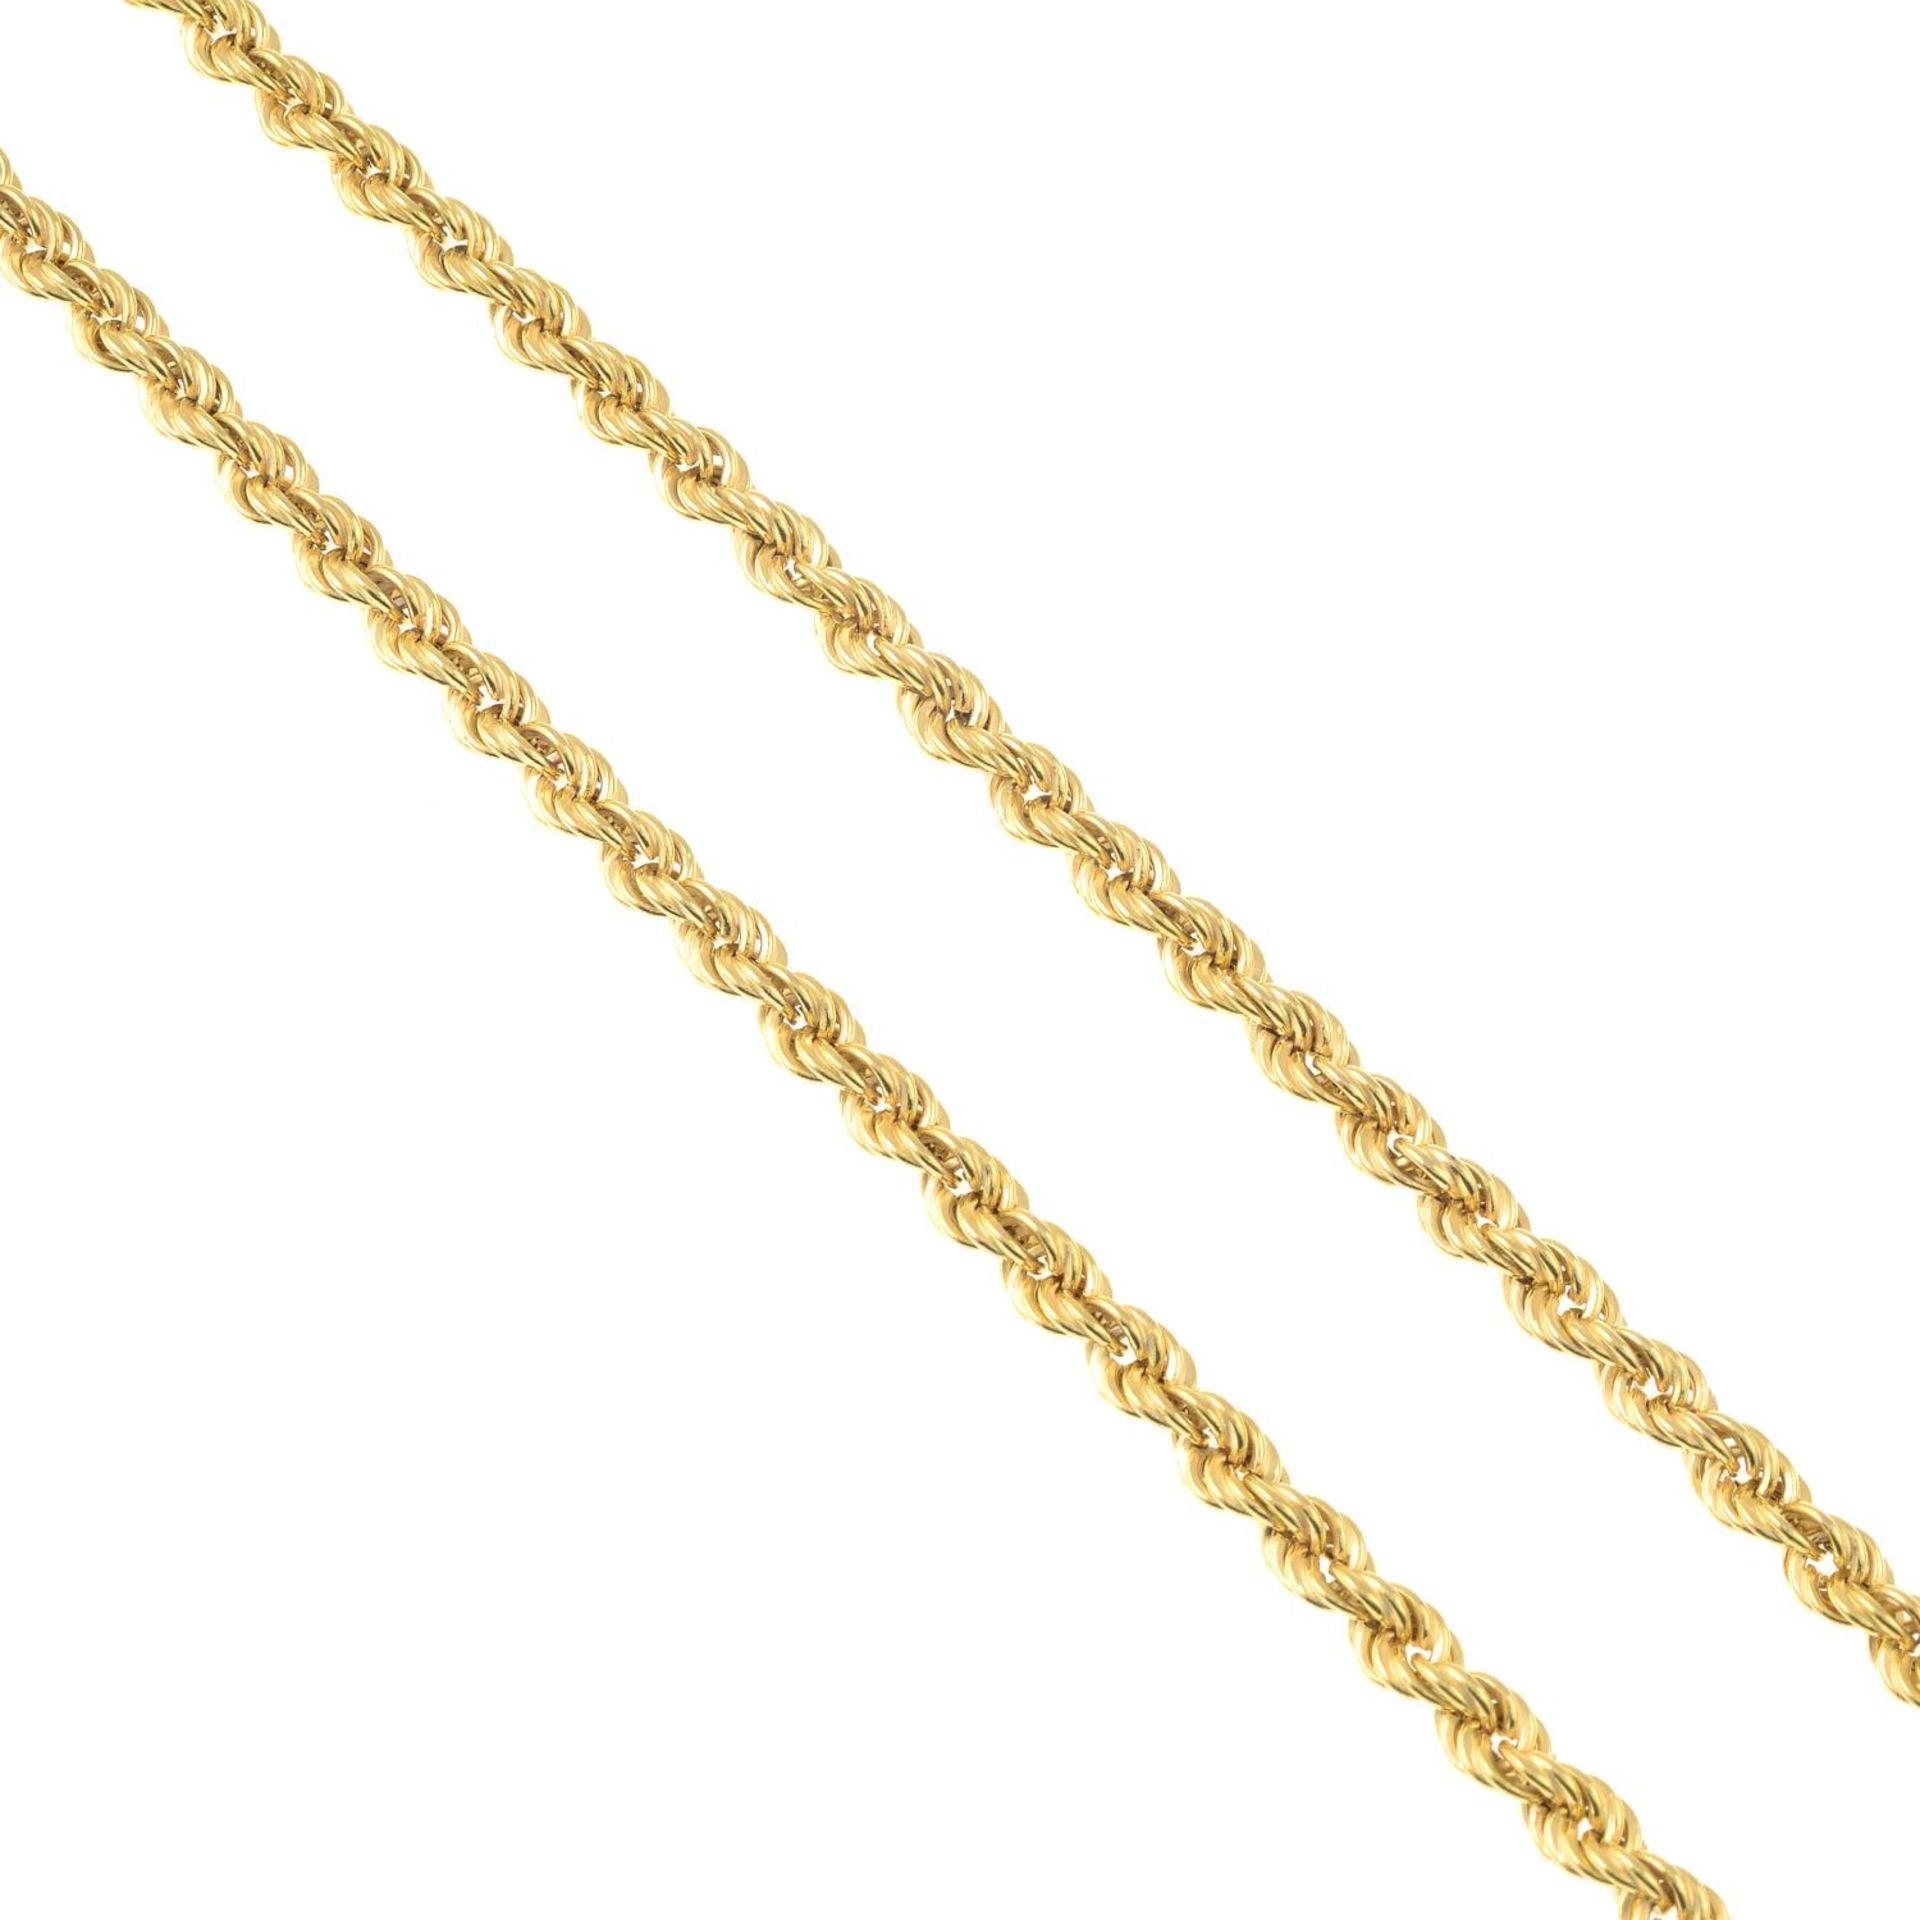 A 9ct gold rope-twist chain.Hallmarks for 9ct gold.